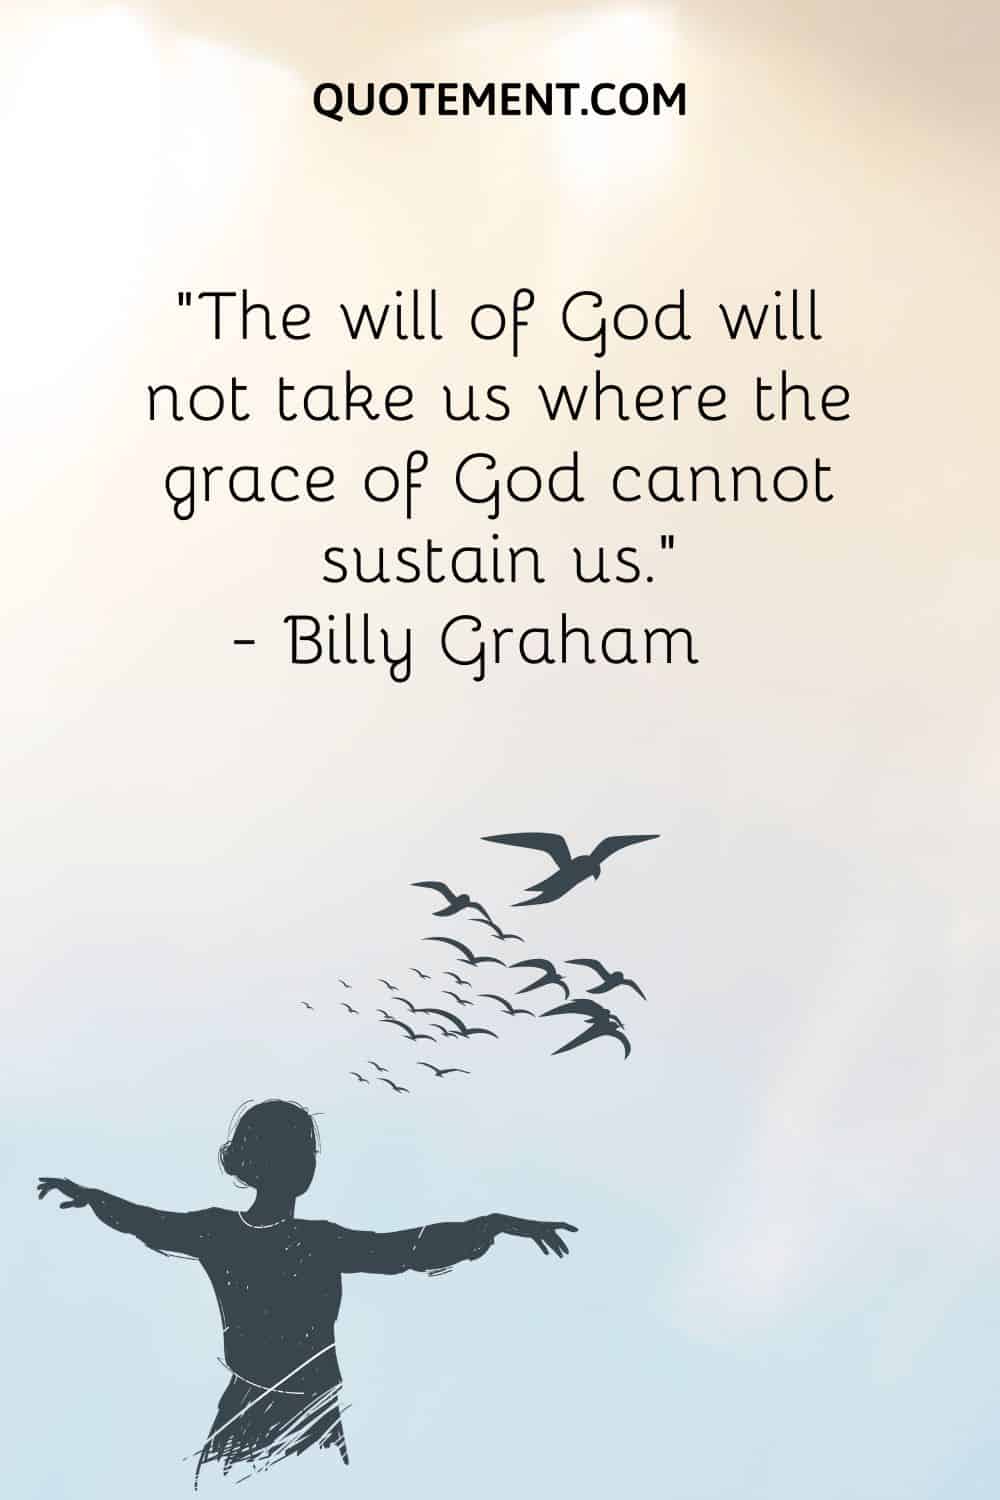 “The will of God will not take us where the grace of God cannot sustain us.” ― Billy Graham